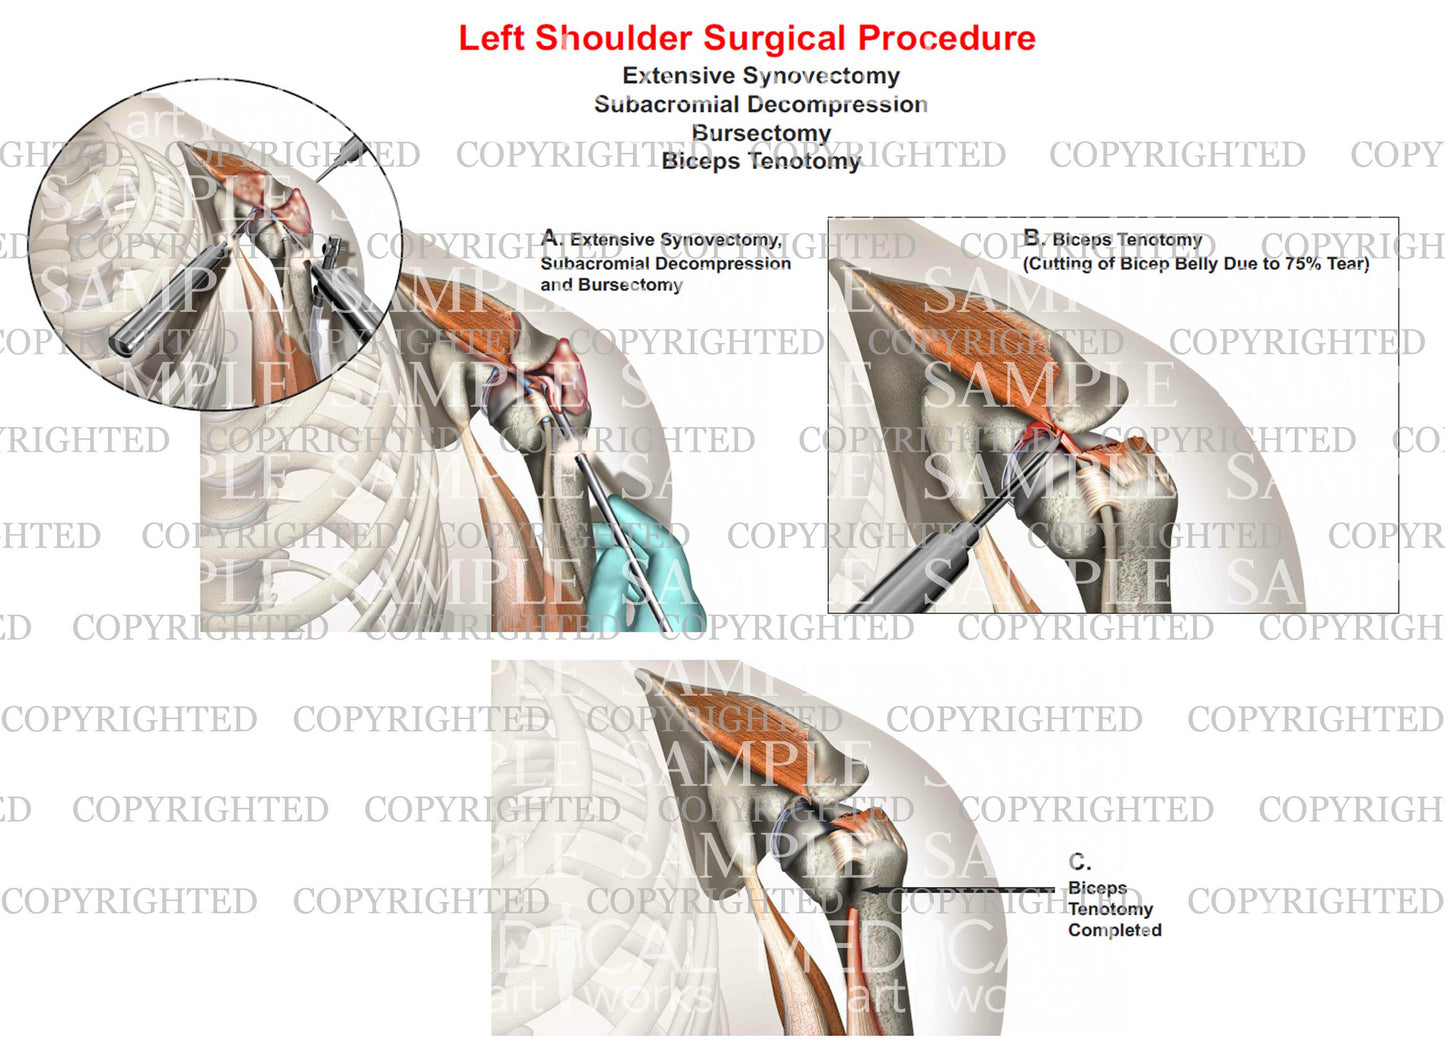 Left shoulder surgery - Synovectomy - Bursectomy - Biceps tenotomy - Subacromial decompression